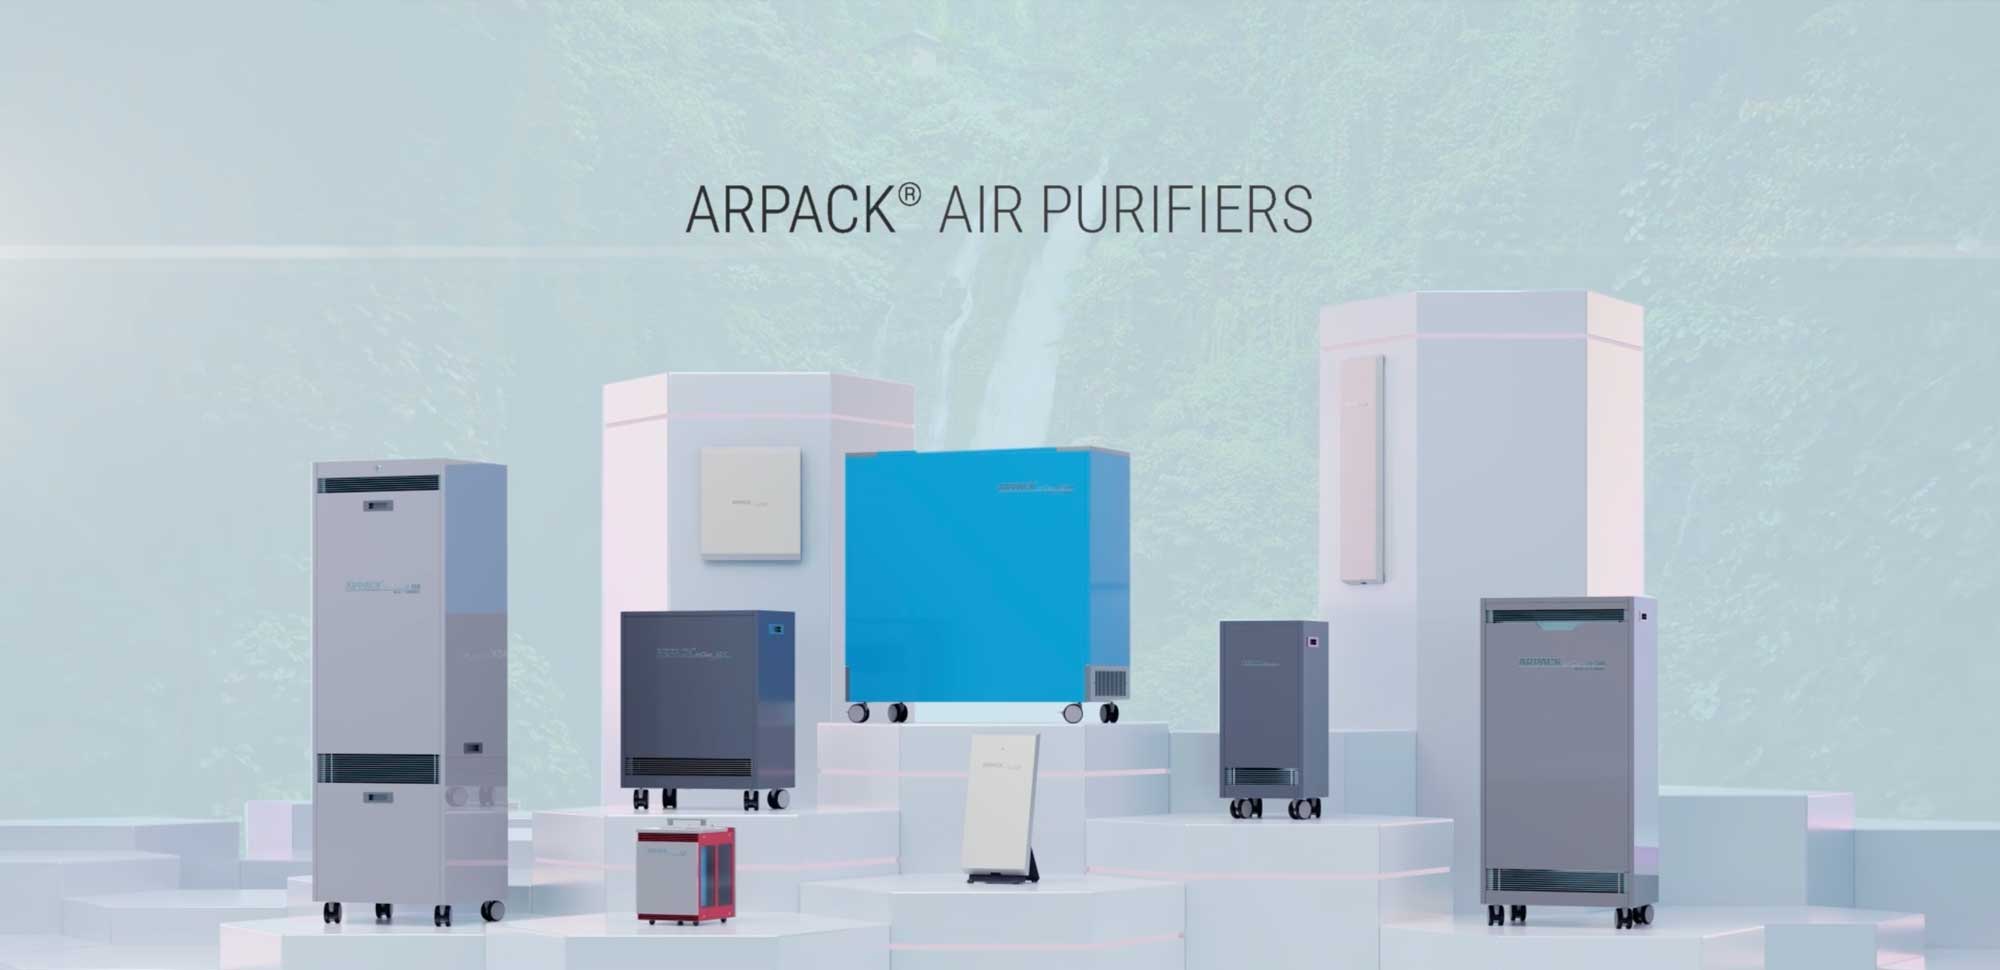 Air Purifiers by Arpack the technology behind